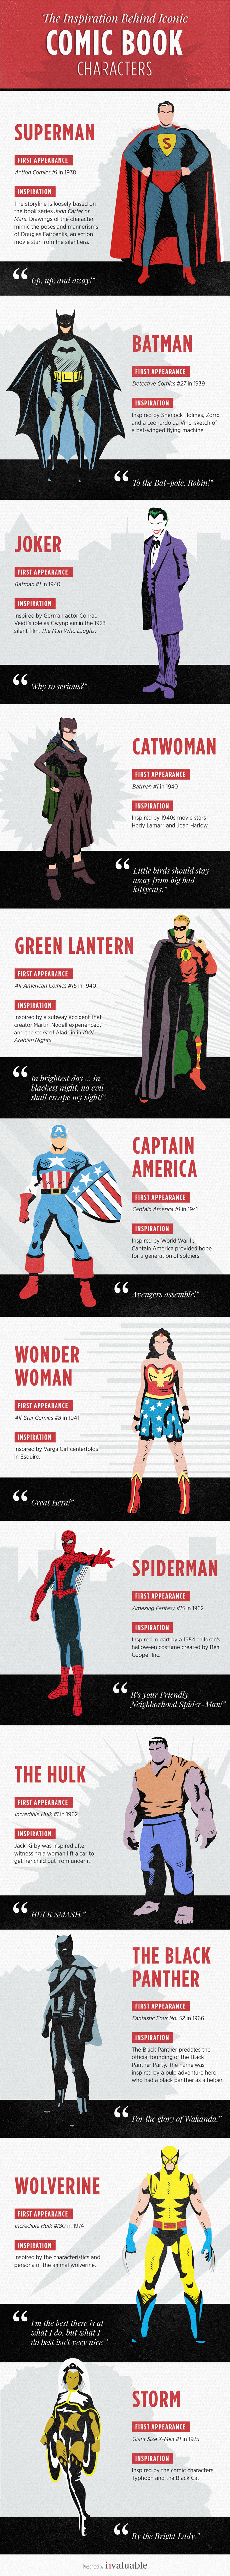 The Inspiration Behind Iconic Comic Book Characters